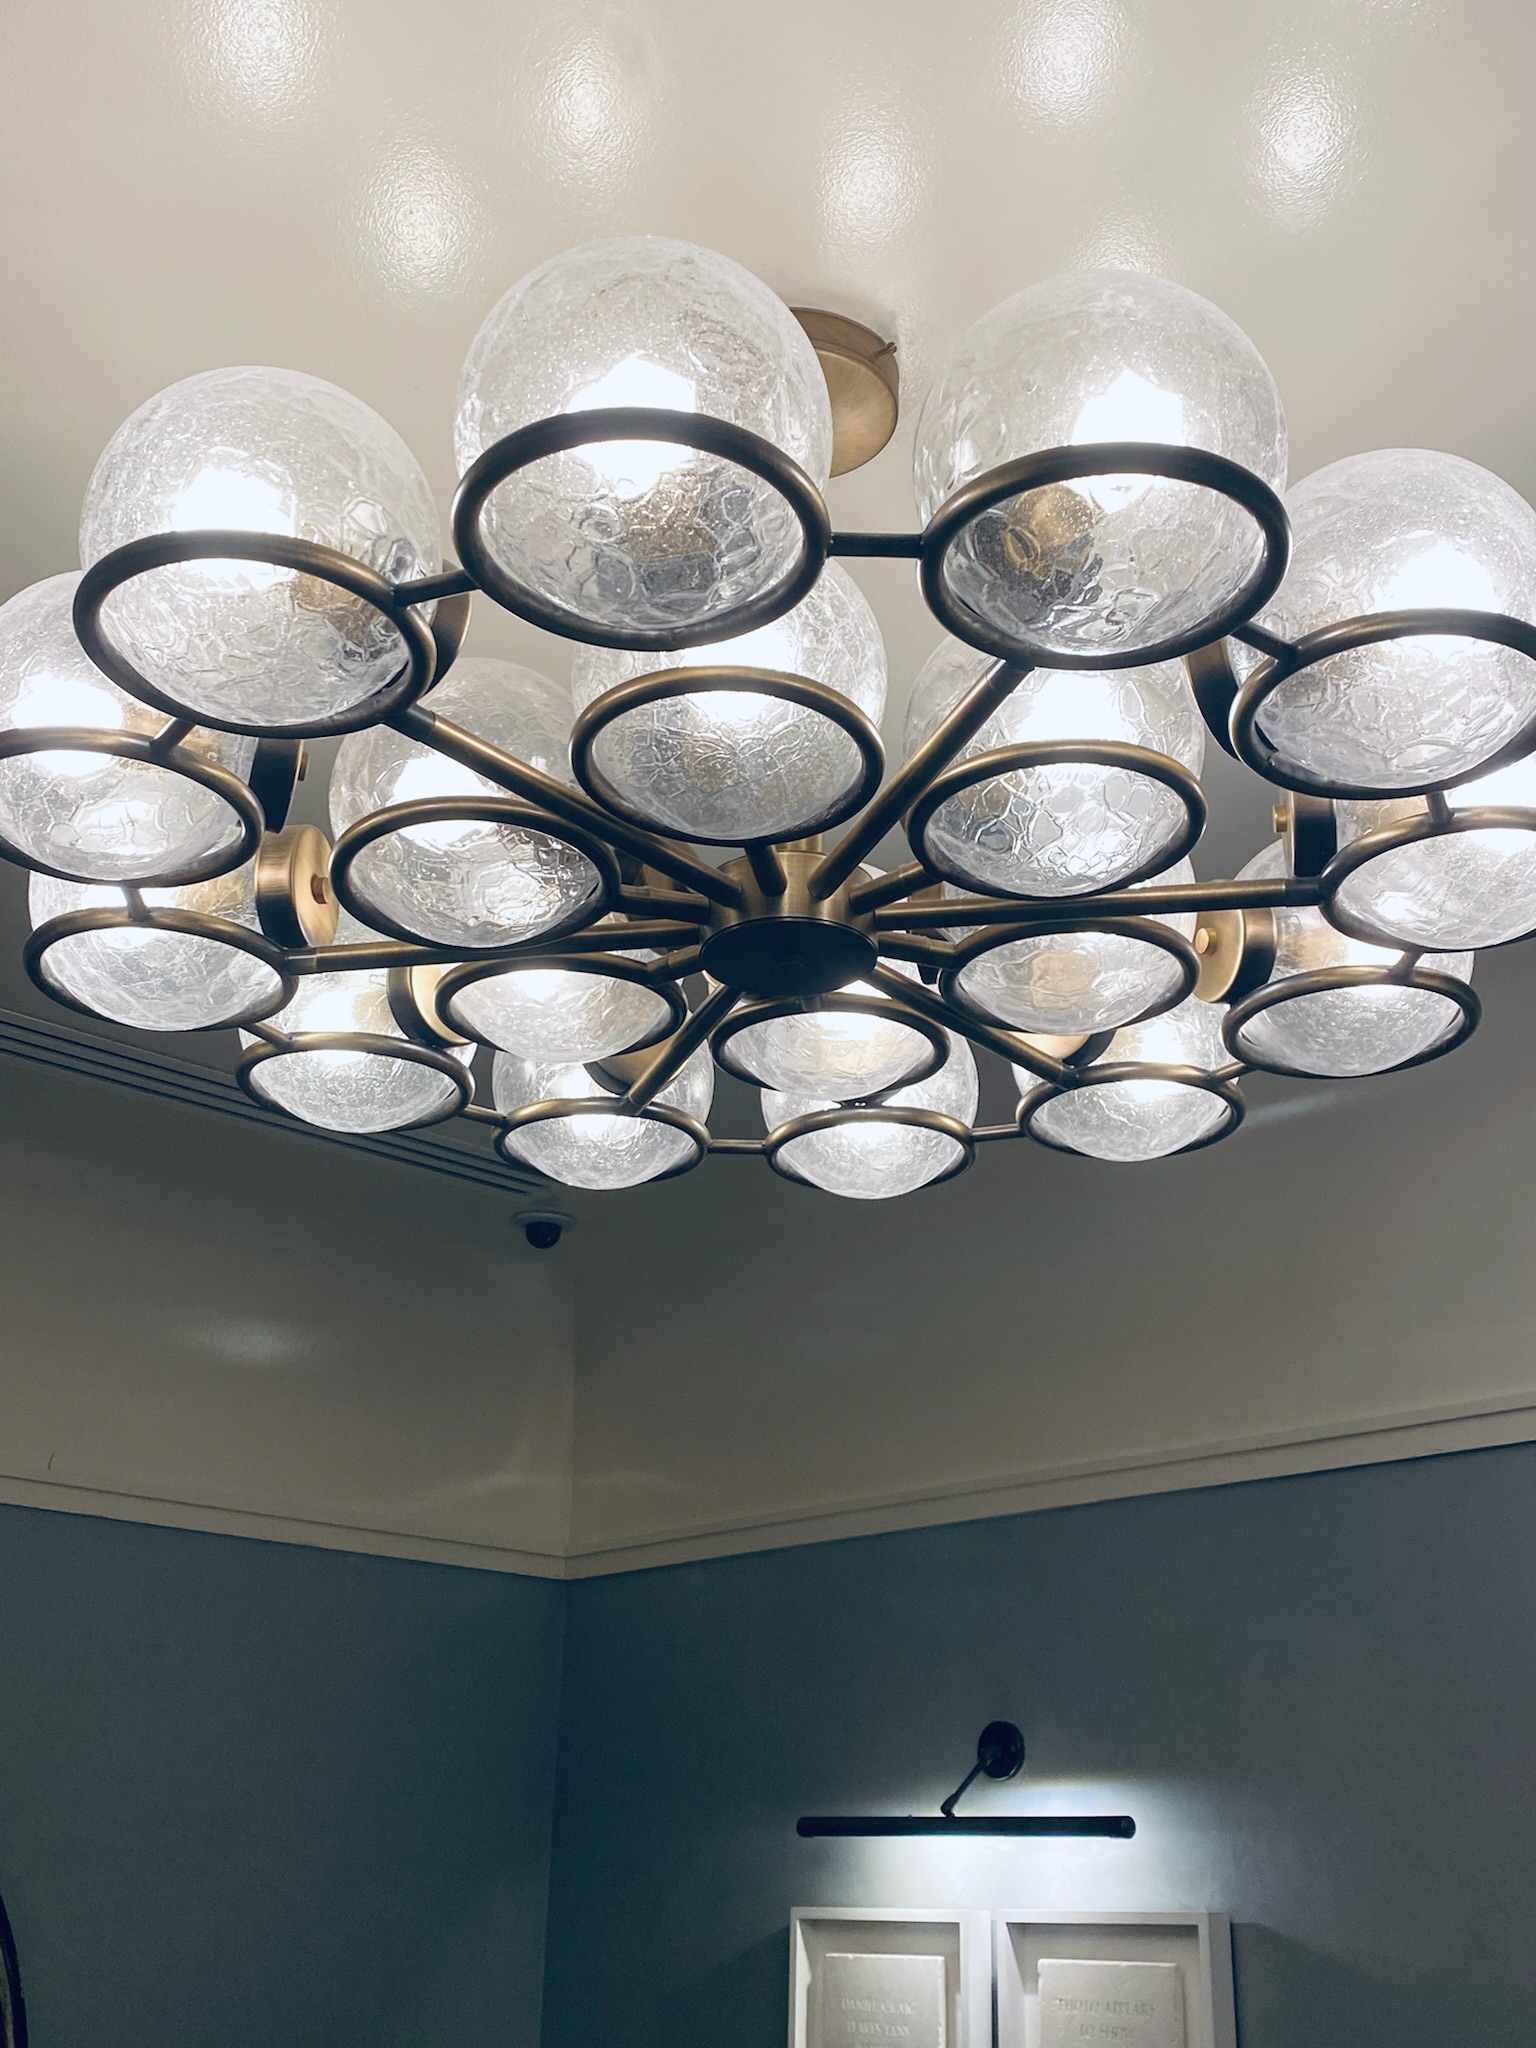 Dramatic ceiling light with glass balls and metal